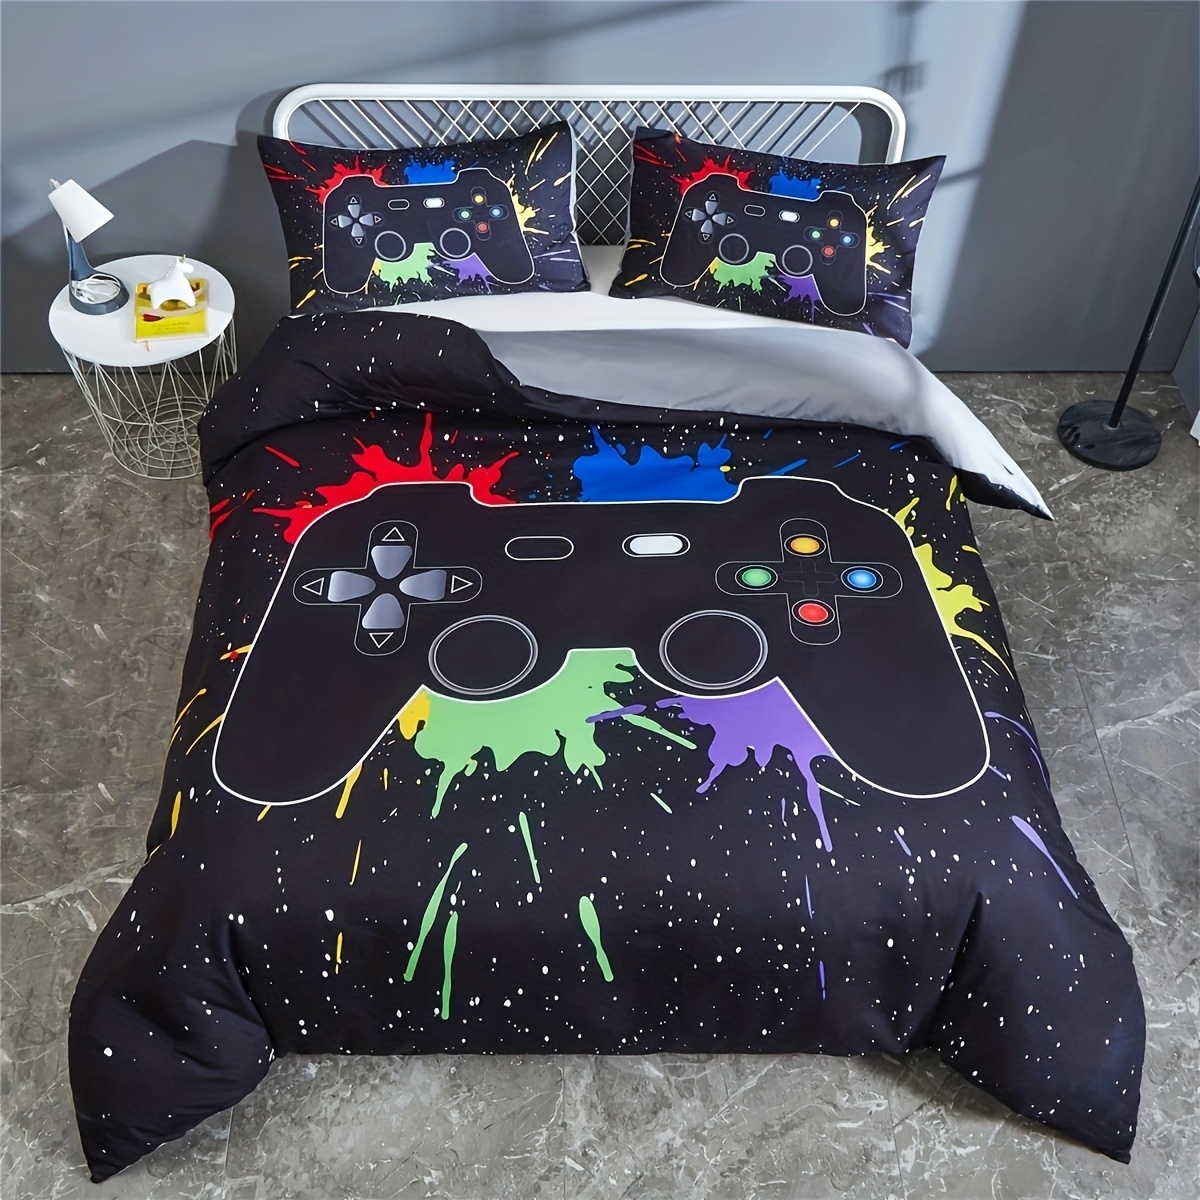  Comforter Set King Size, Gamepad Game Gamer Cool Soft Bedding  Set for Kids and Adults, Kids Gaming Boy Comforter Set with 2 Pillowcases  for Bedroom Bed Decor : Home & Kitchen